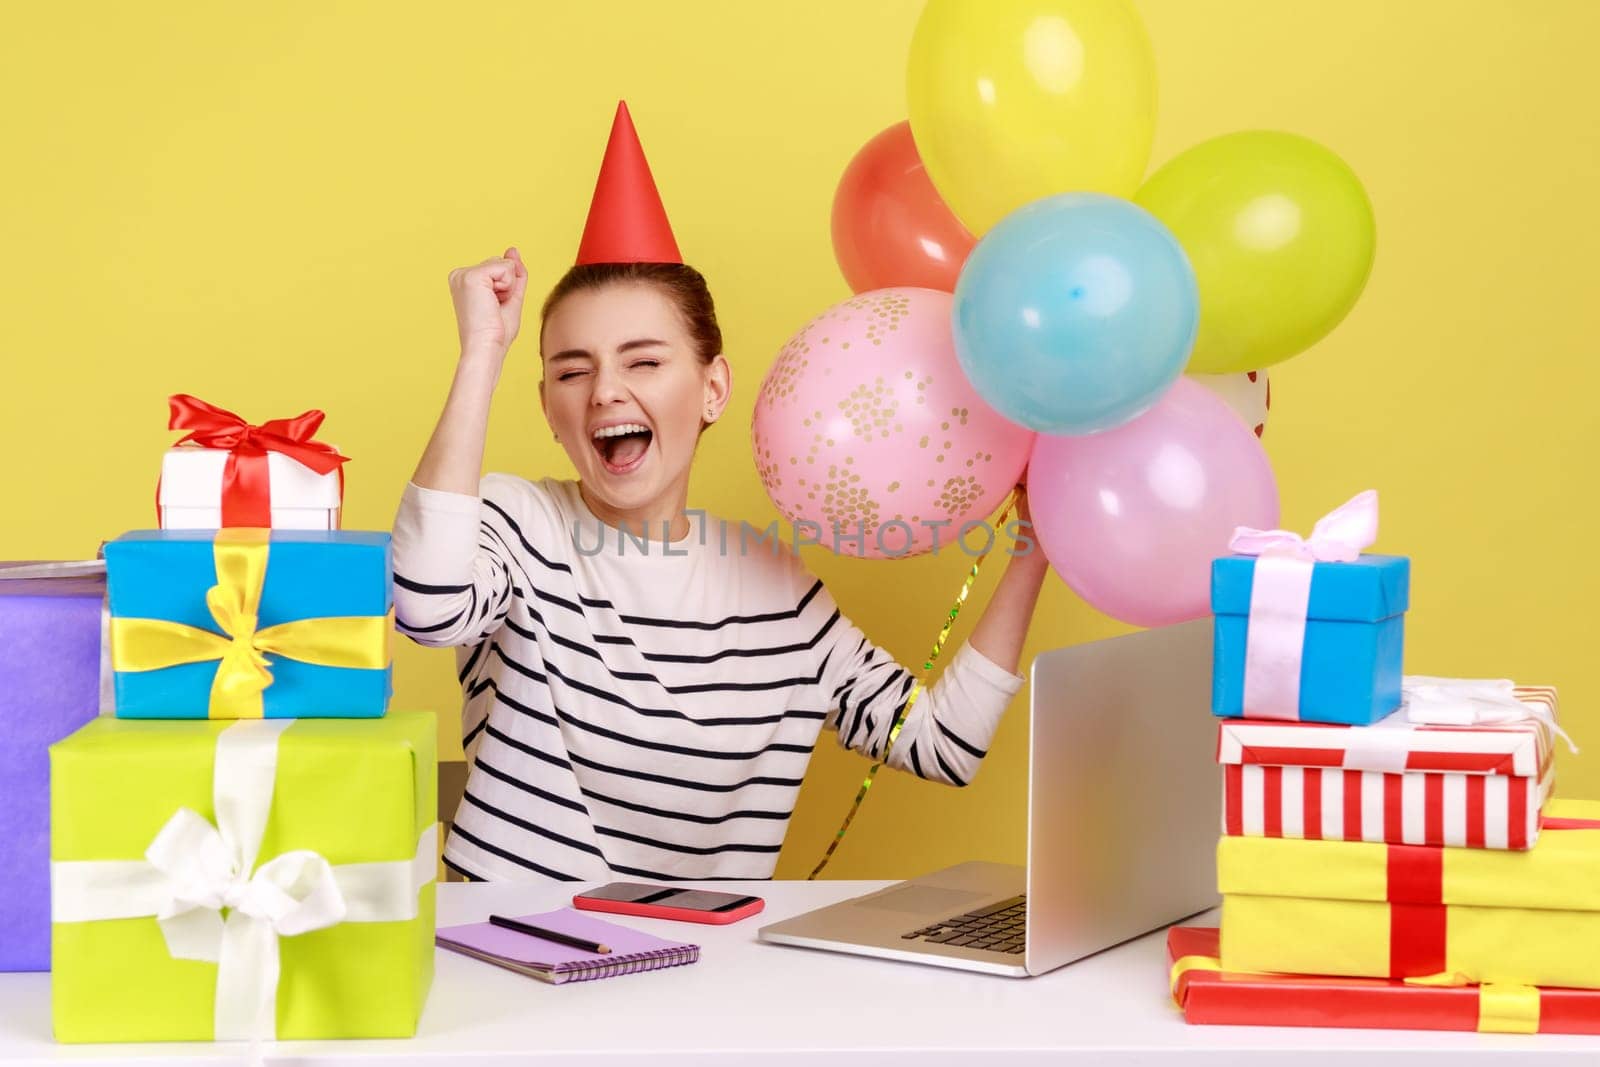 Excited woman office employee with party cone sitting workplace surrounded by gift boxes and balloons, shouting for joy, celebrating birthday. Indoor studio studio shot isolated on yellow background.